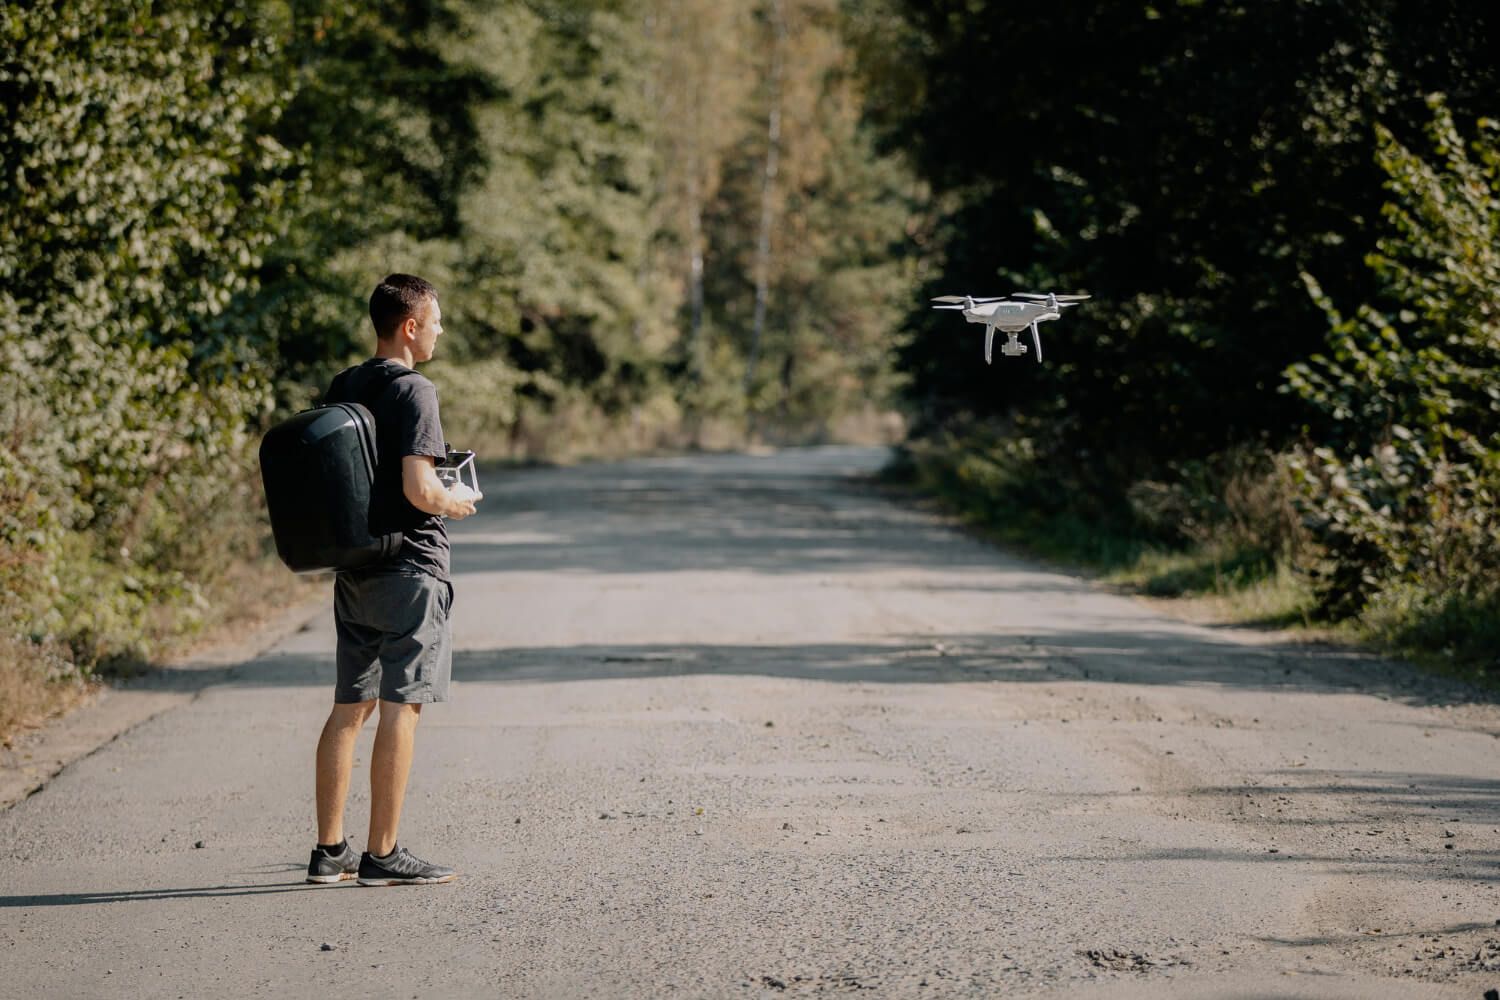 A compact drone placed next to a backpack, illustrating its portability